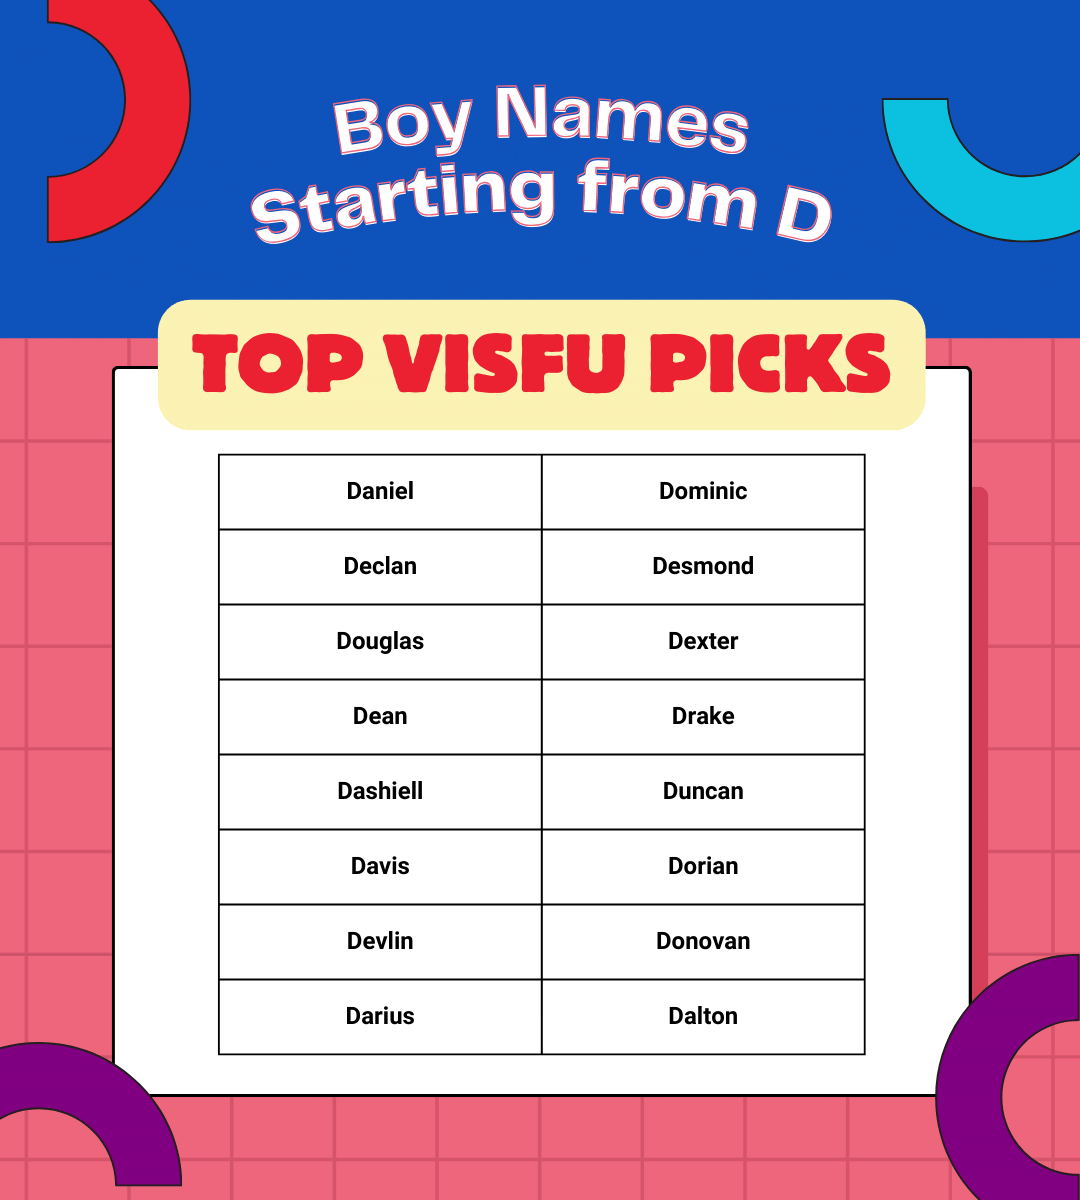 Boy names starting from D